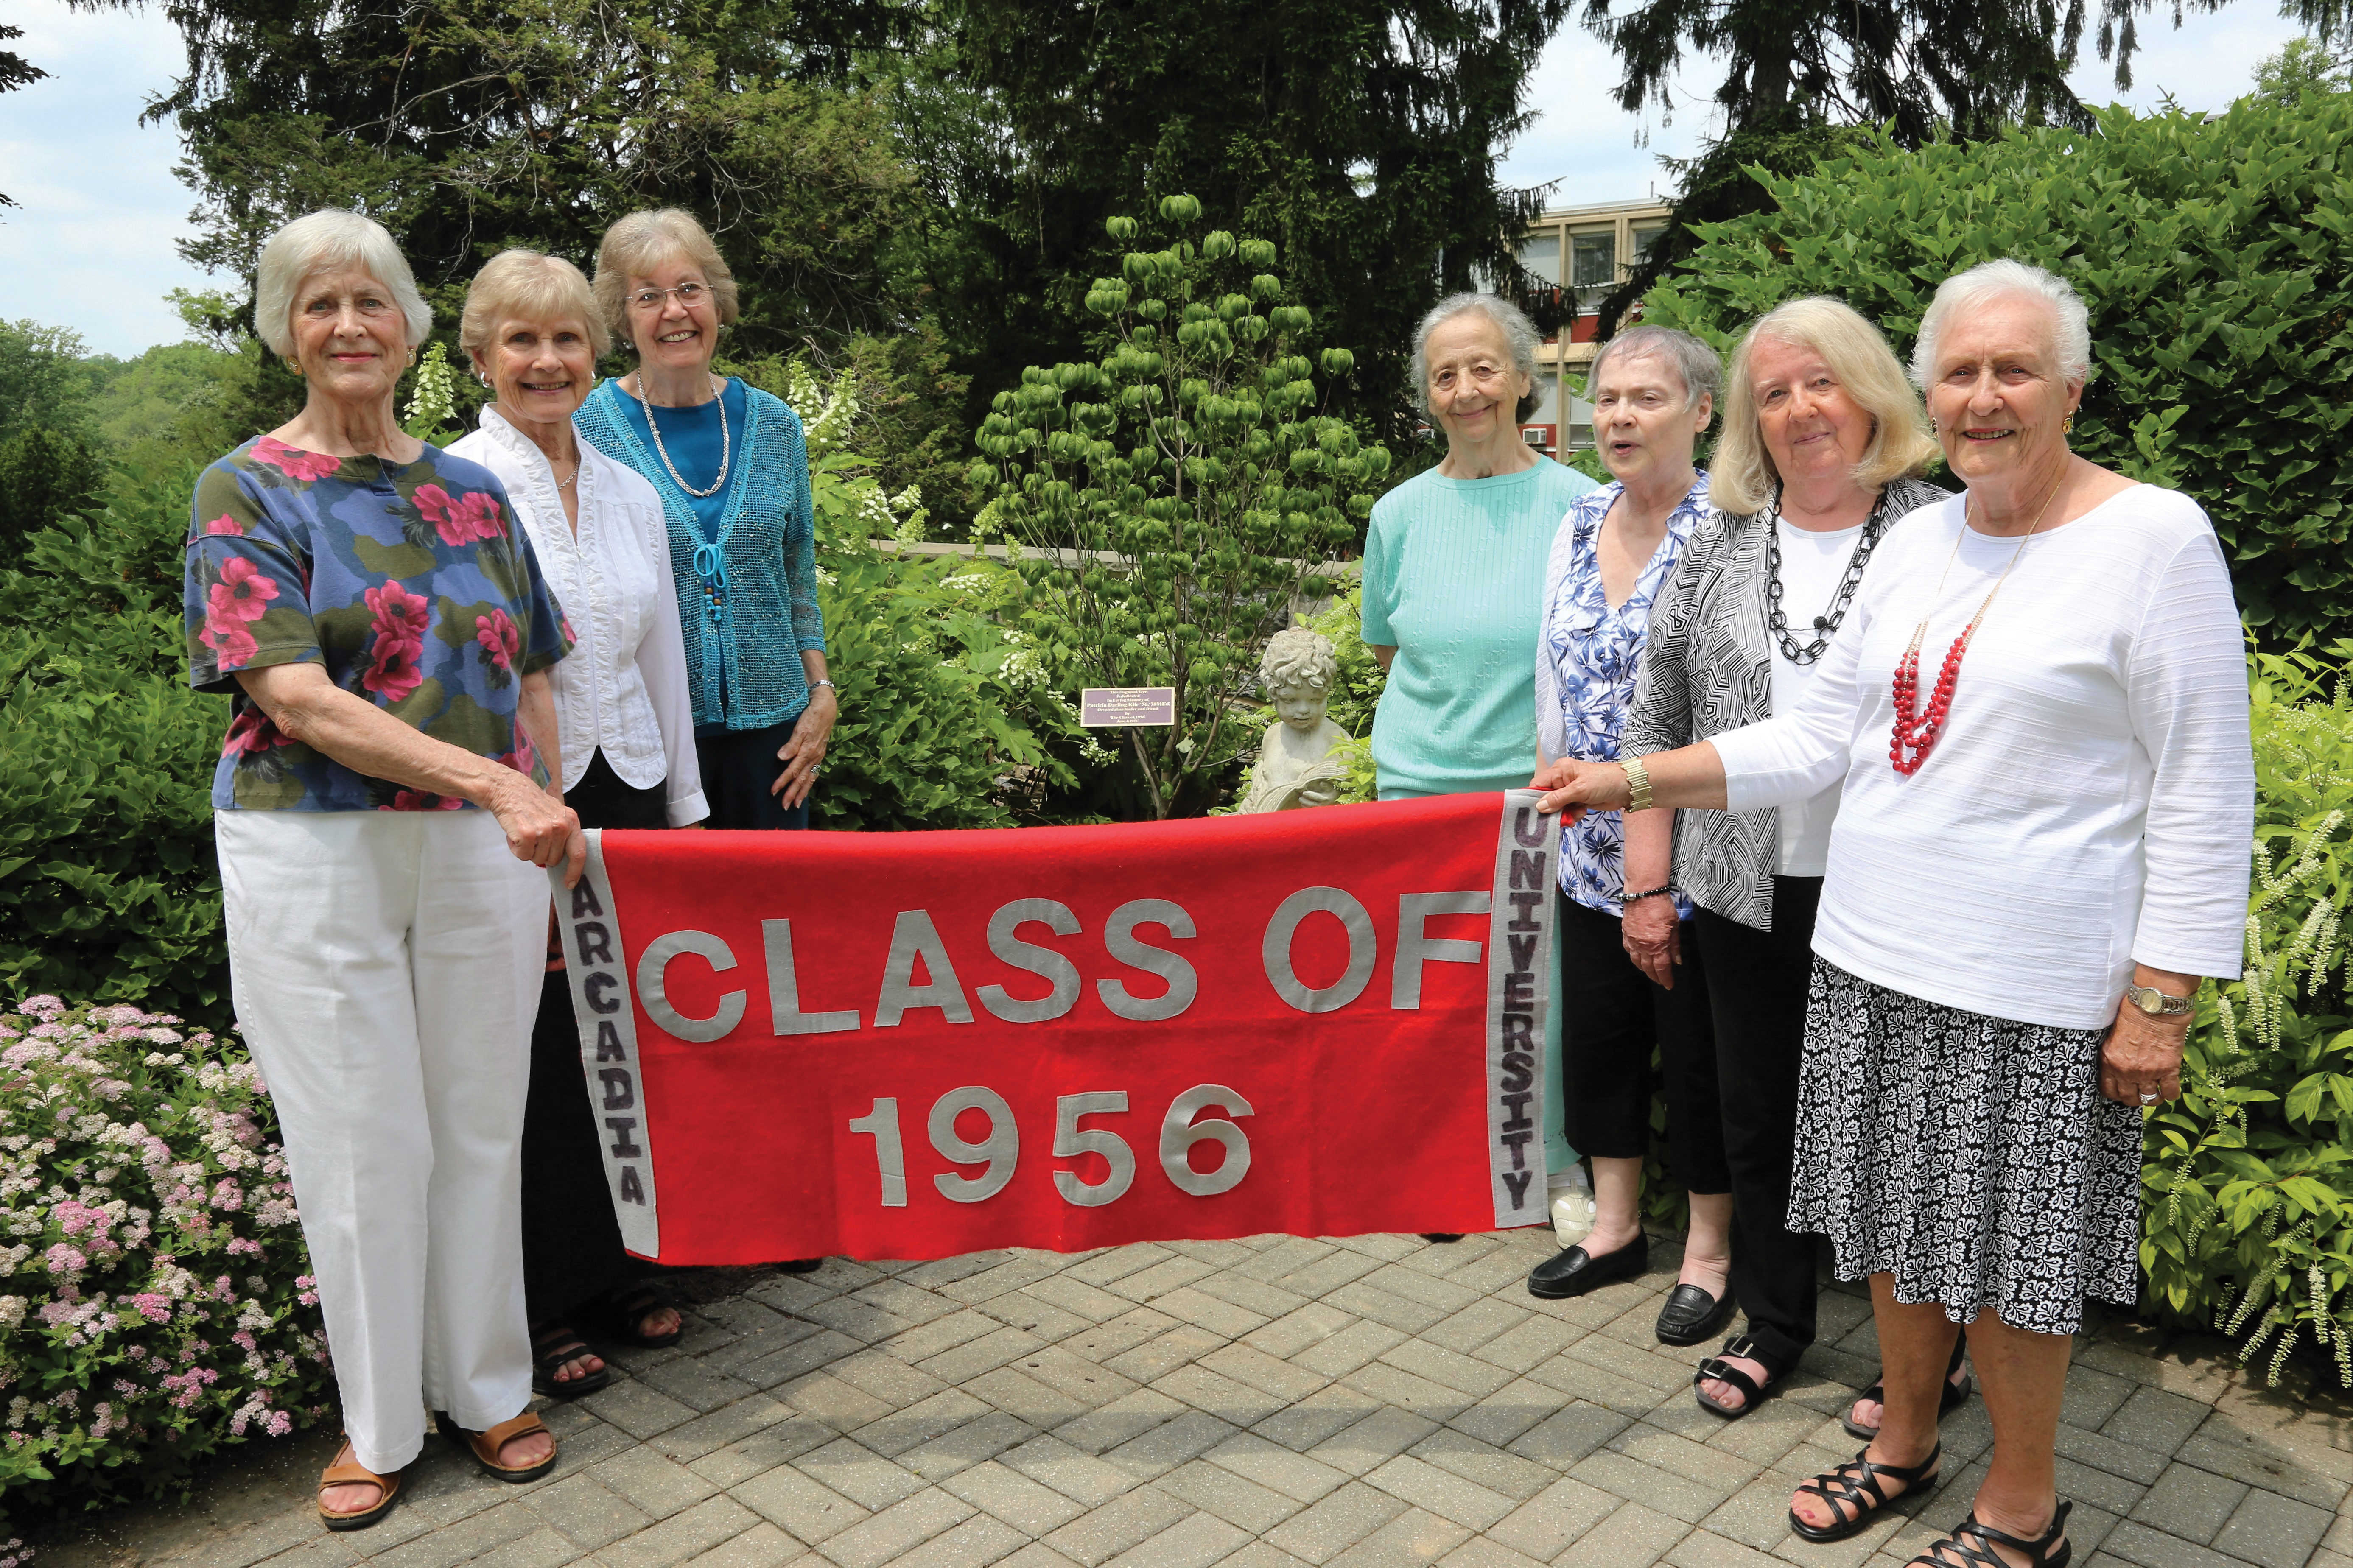 Seven Senior Alumni women group photo holding a banner from the Class of 1956.